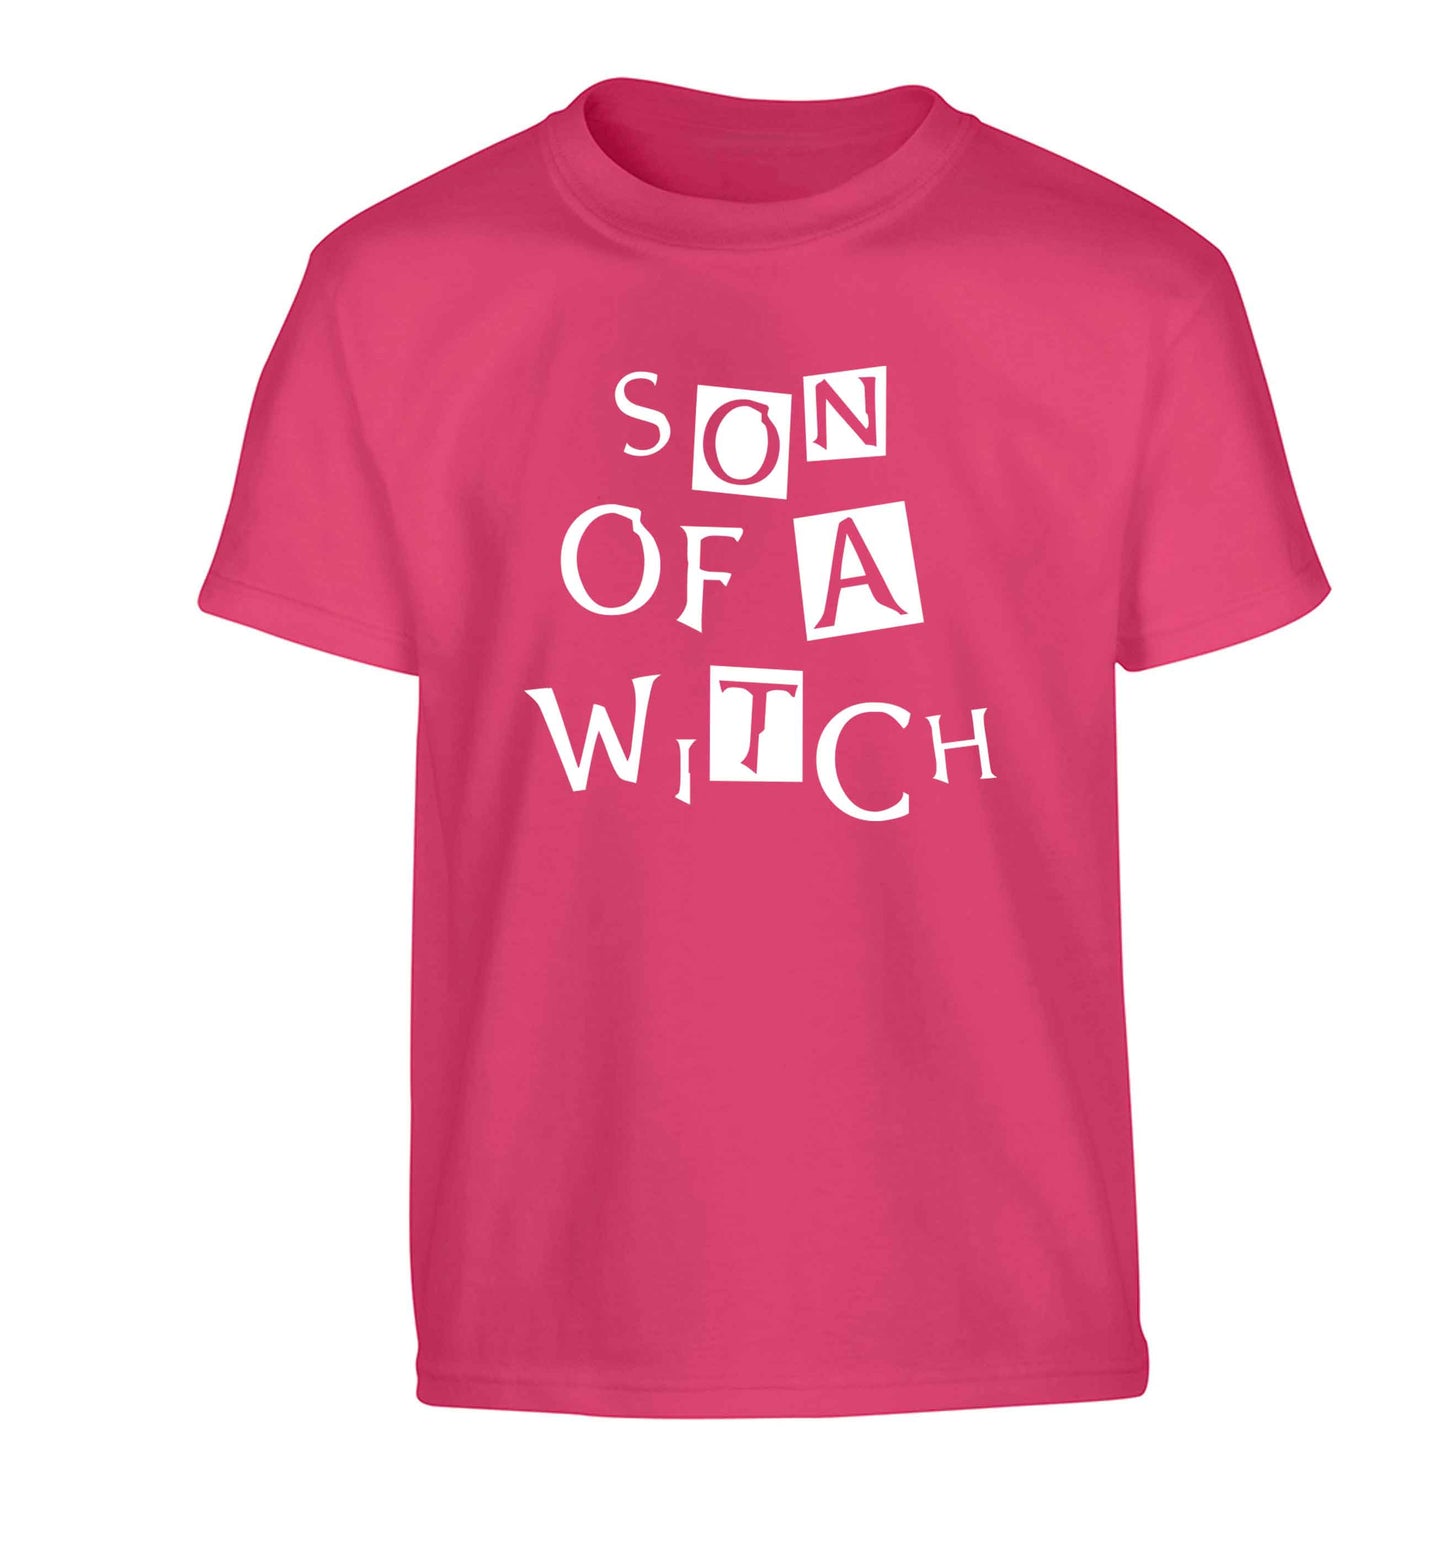 Son of a witch Children's pink Tshirt 12-13 Years